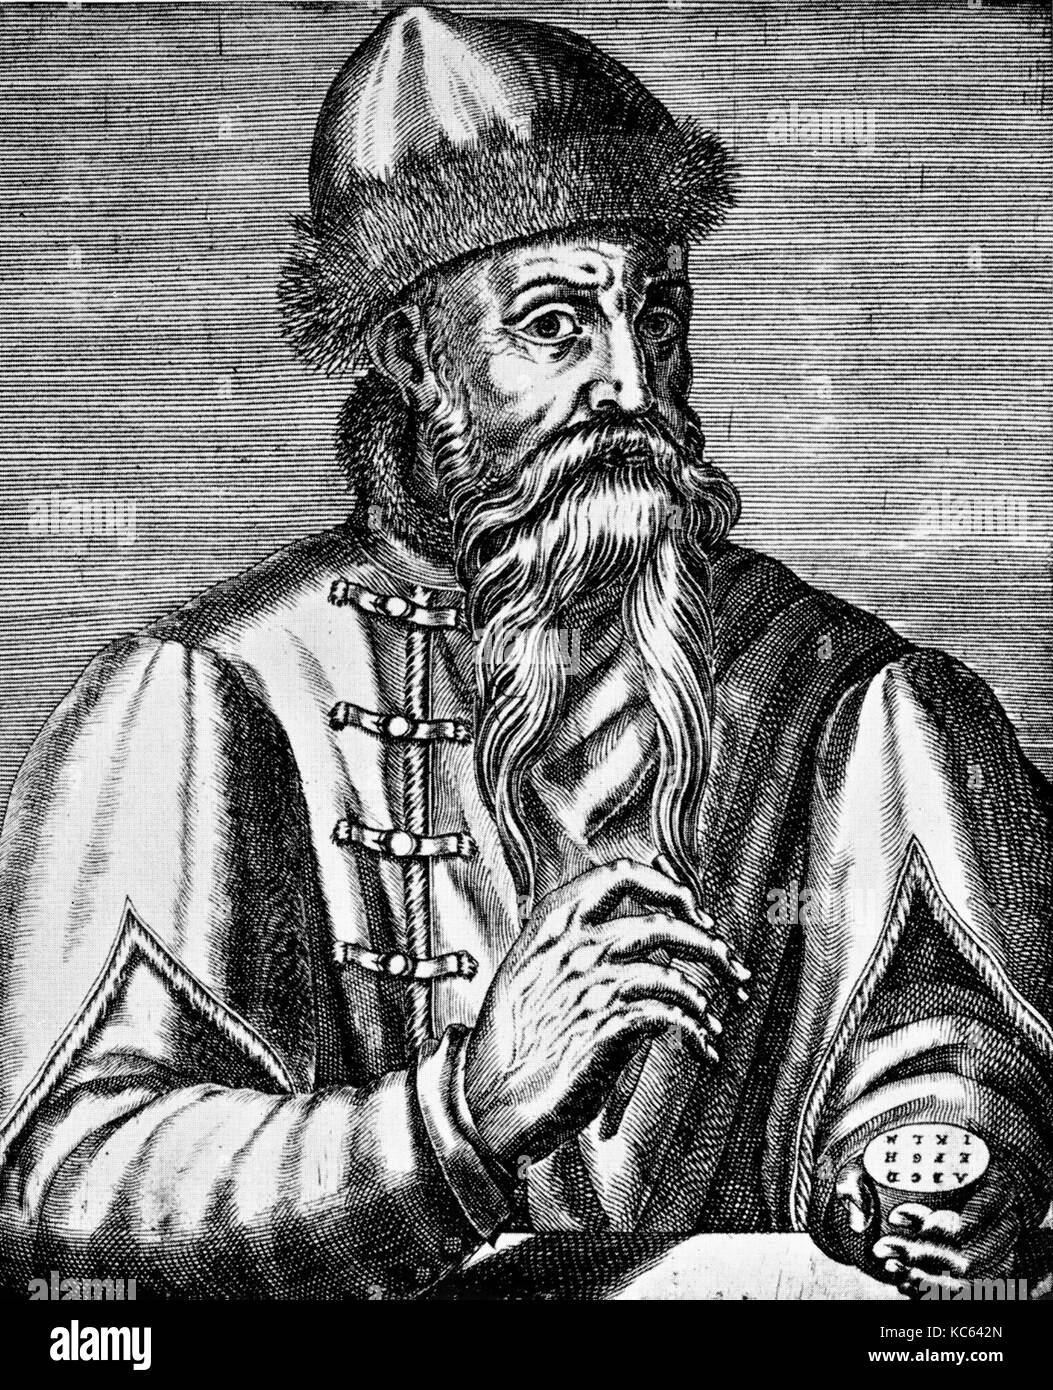 JOHANNES GUTENBERG (c 1400-1468) German inventor of the printing press in a 16th century engraving Stock Photo